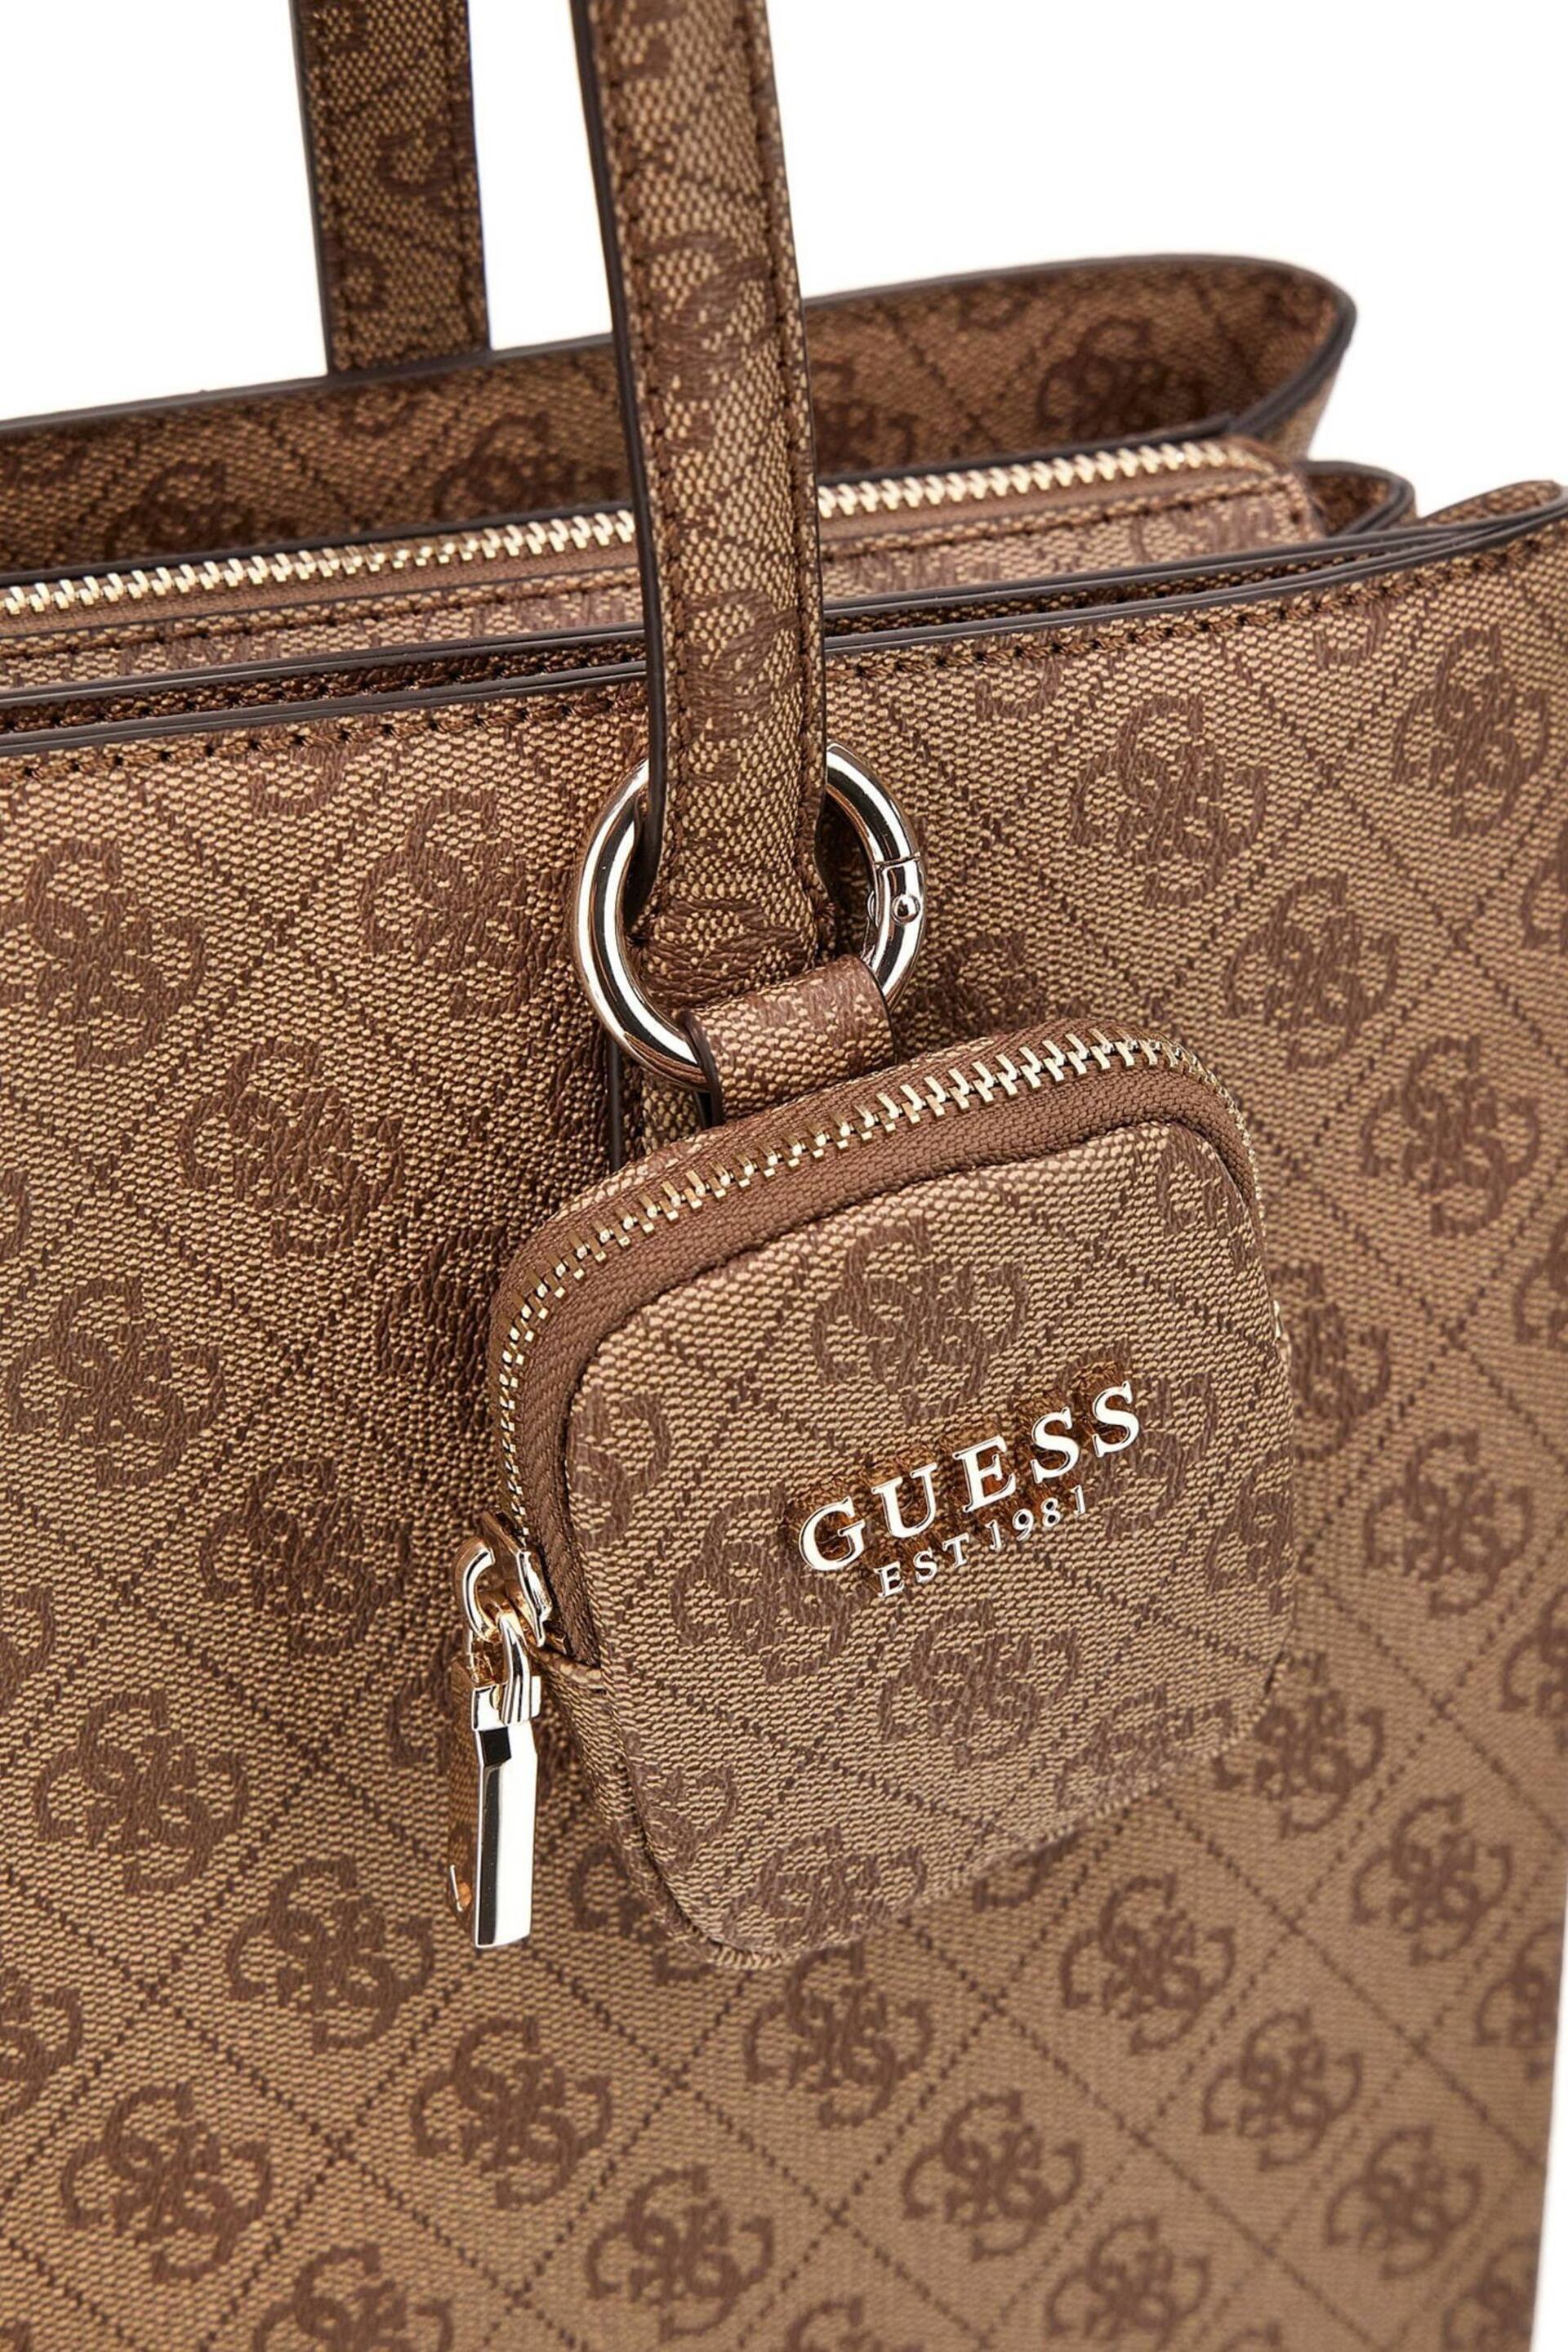 GUESS Power Play Tech Tote Bag - Image 4 of 5